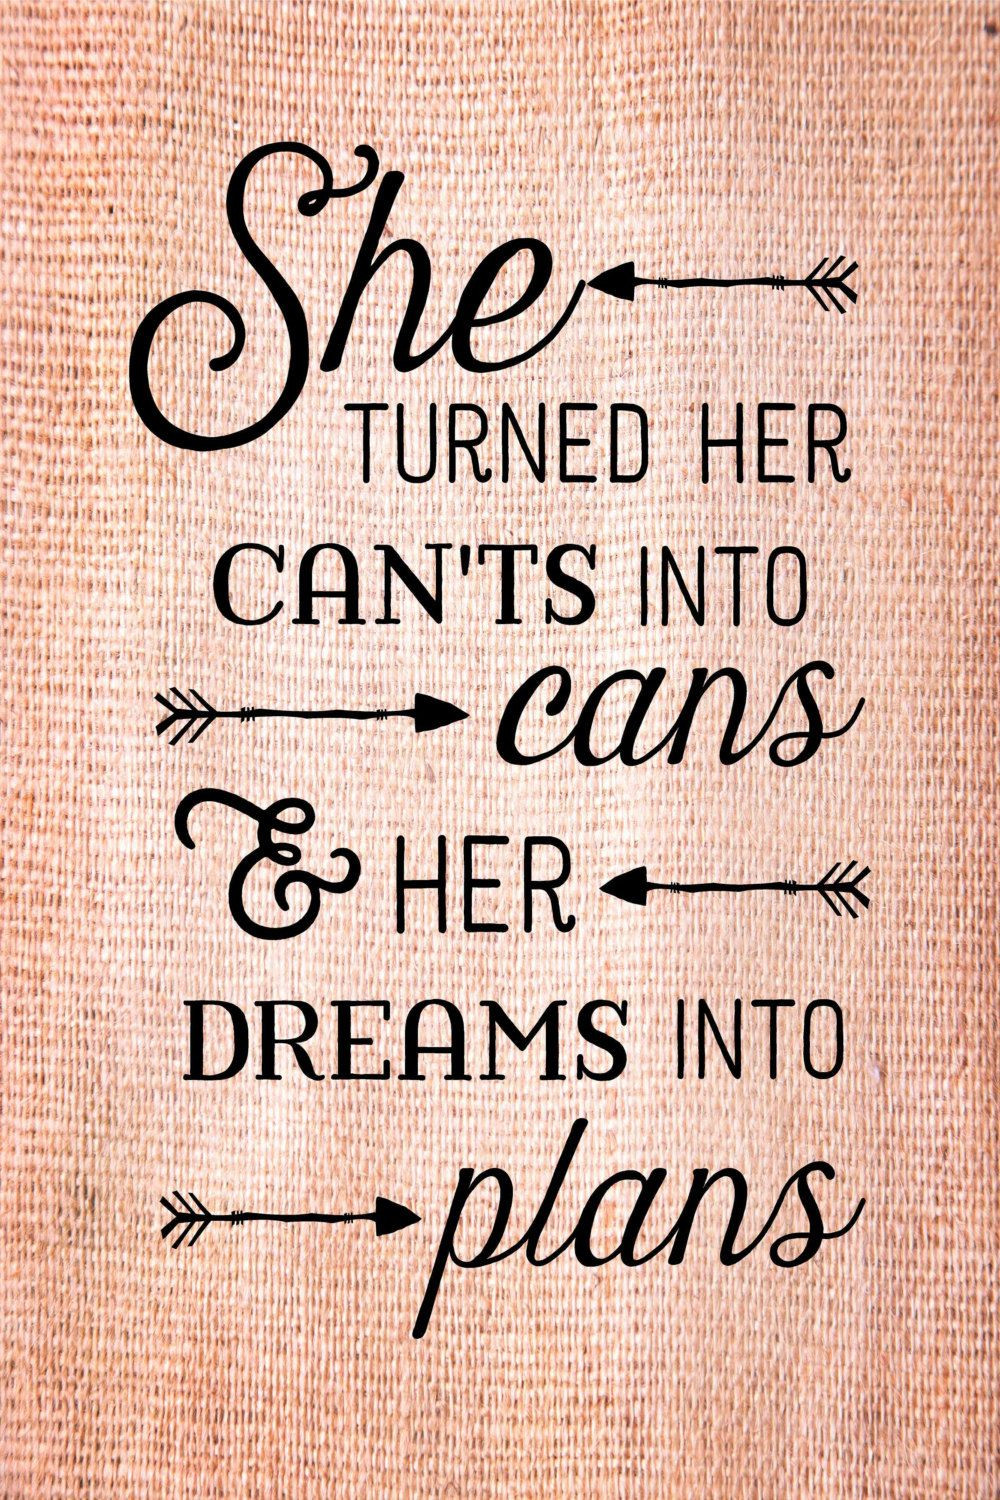 Great Graduation Quotes
 Graduation Gift She turned her can ts into cans dreams